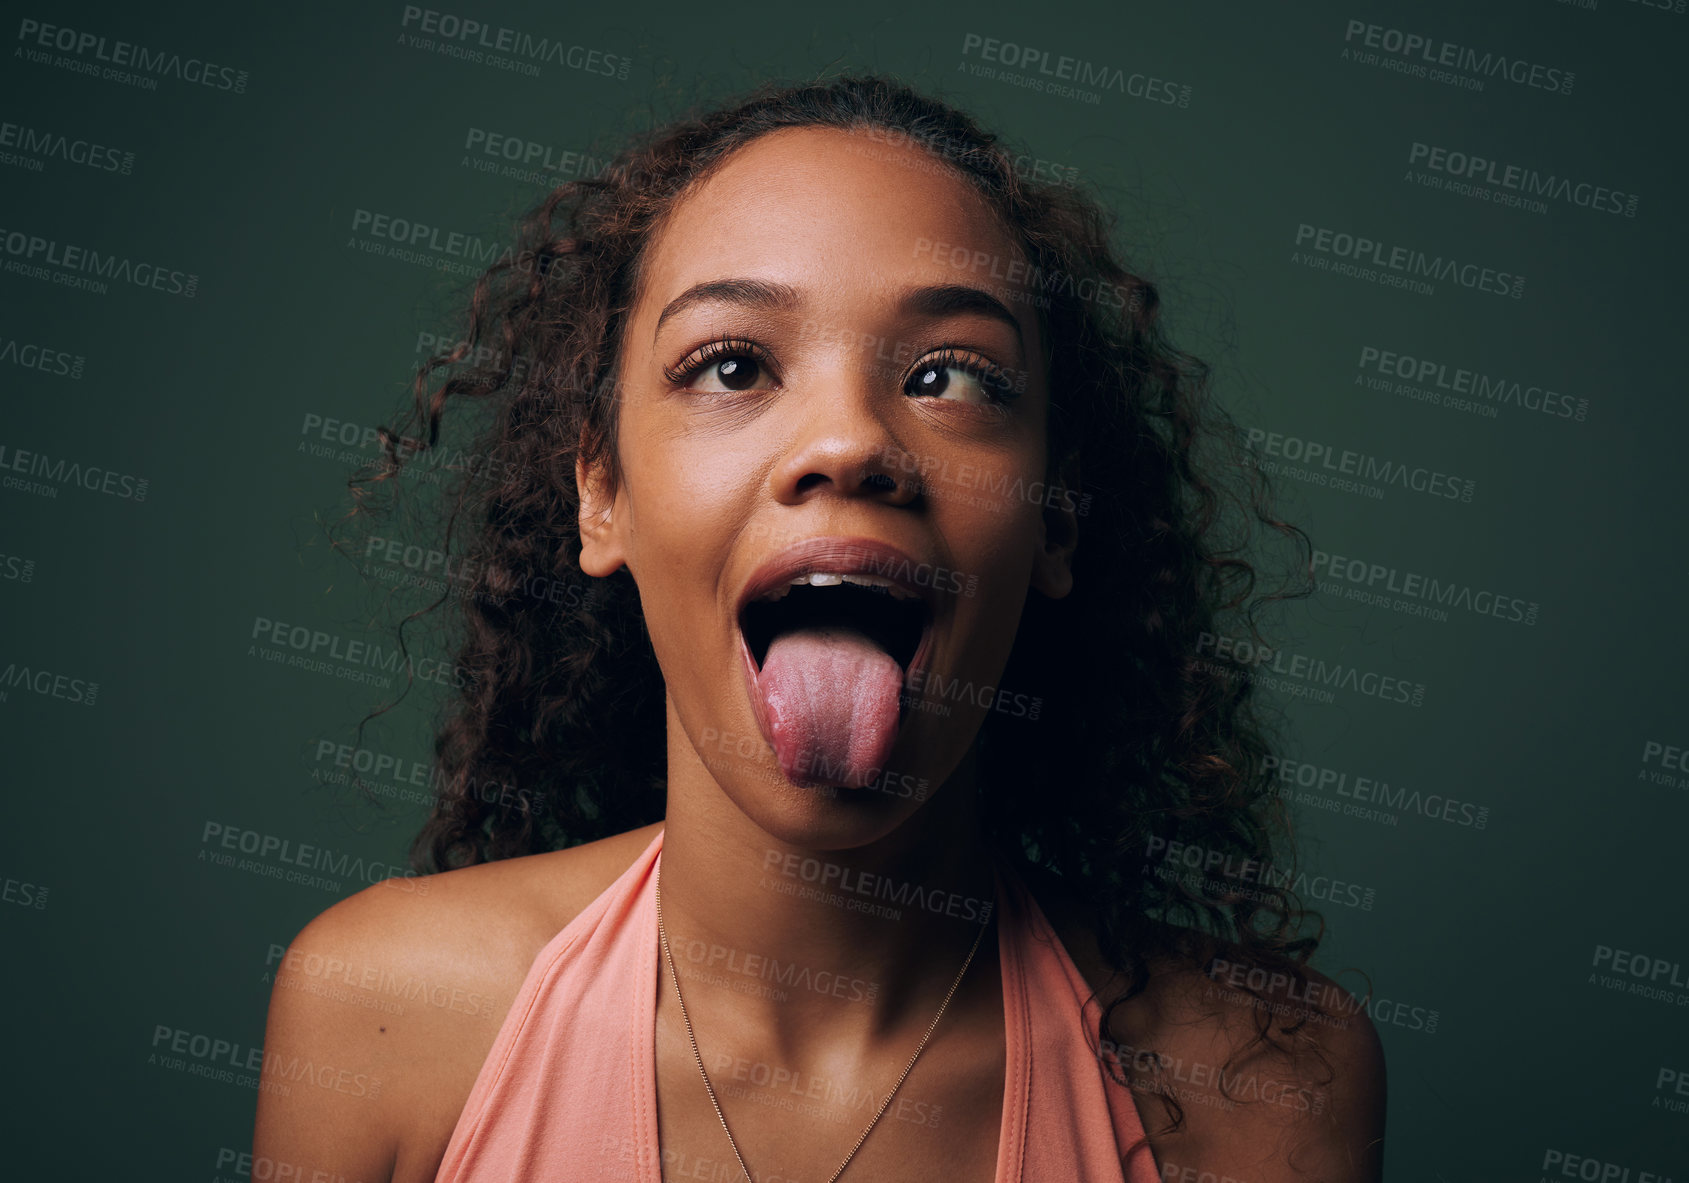 Buy stock photo Cropped shot of an attractive and quirky young woman posing against a green background in studio